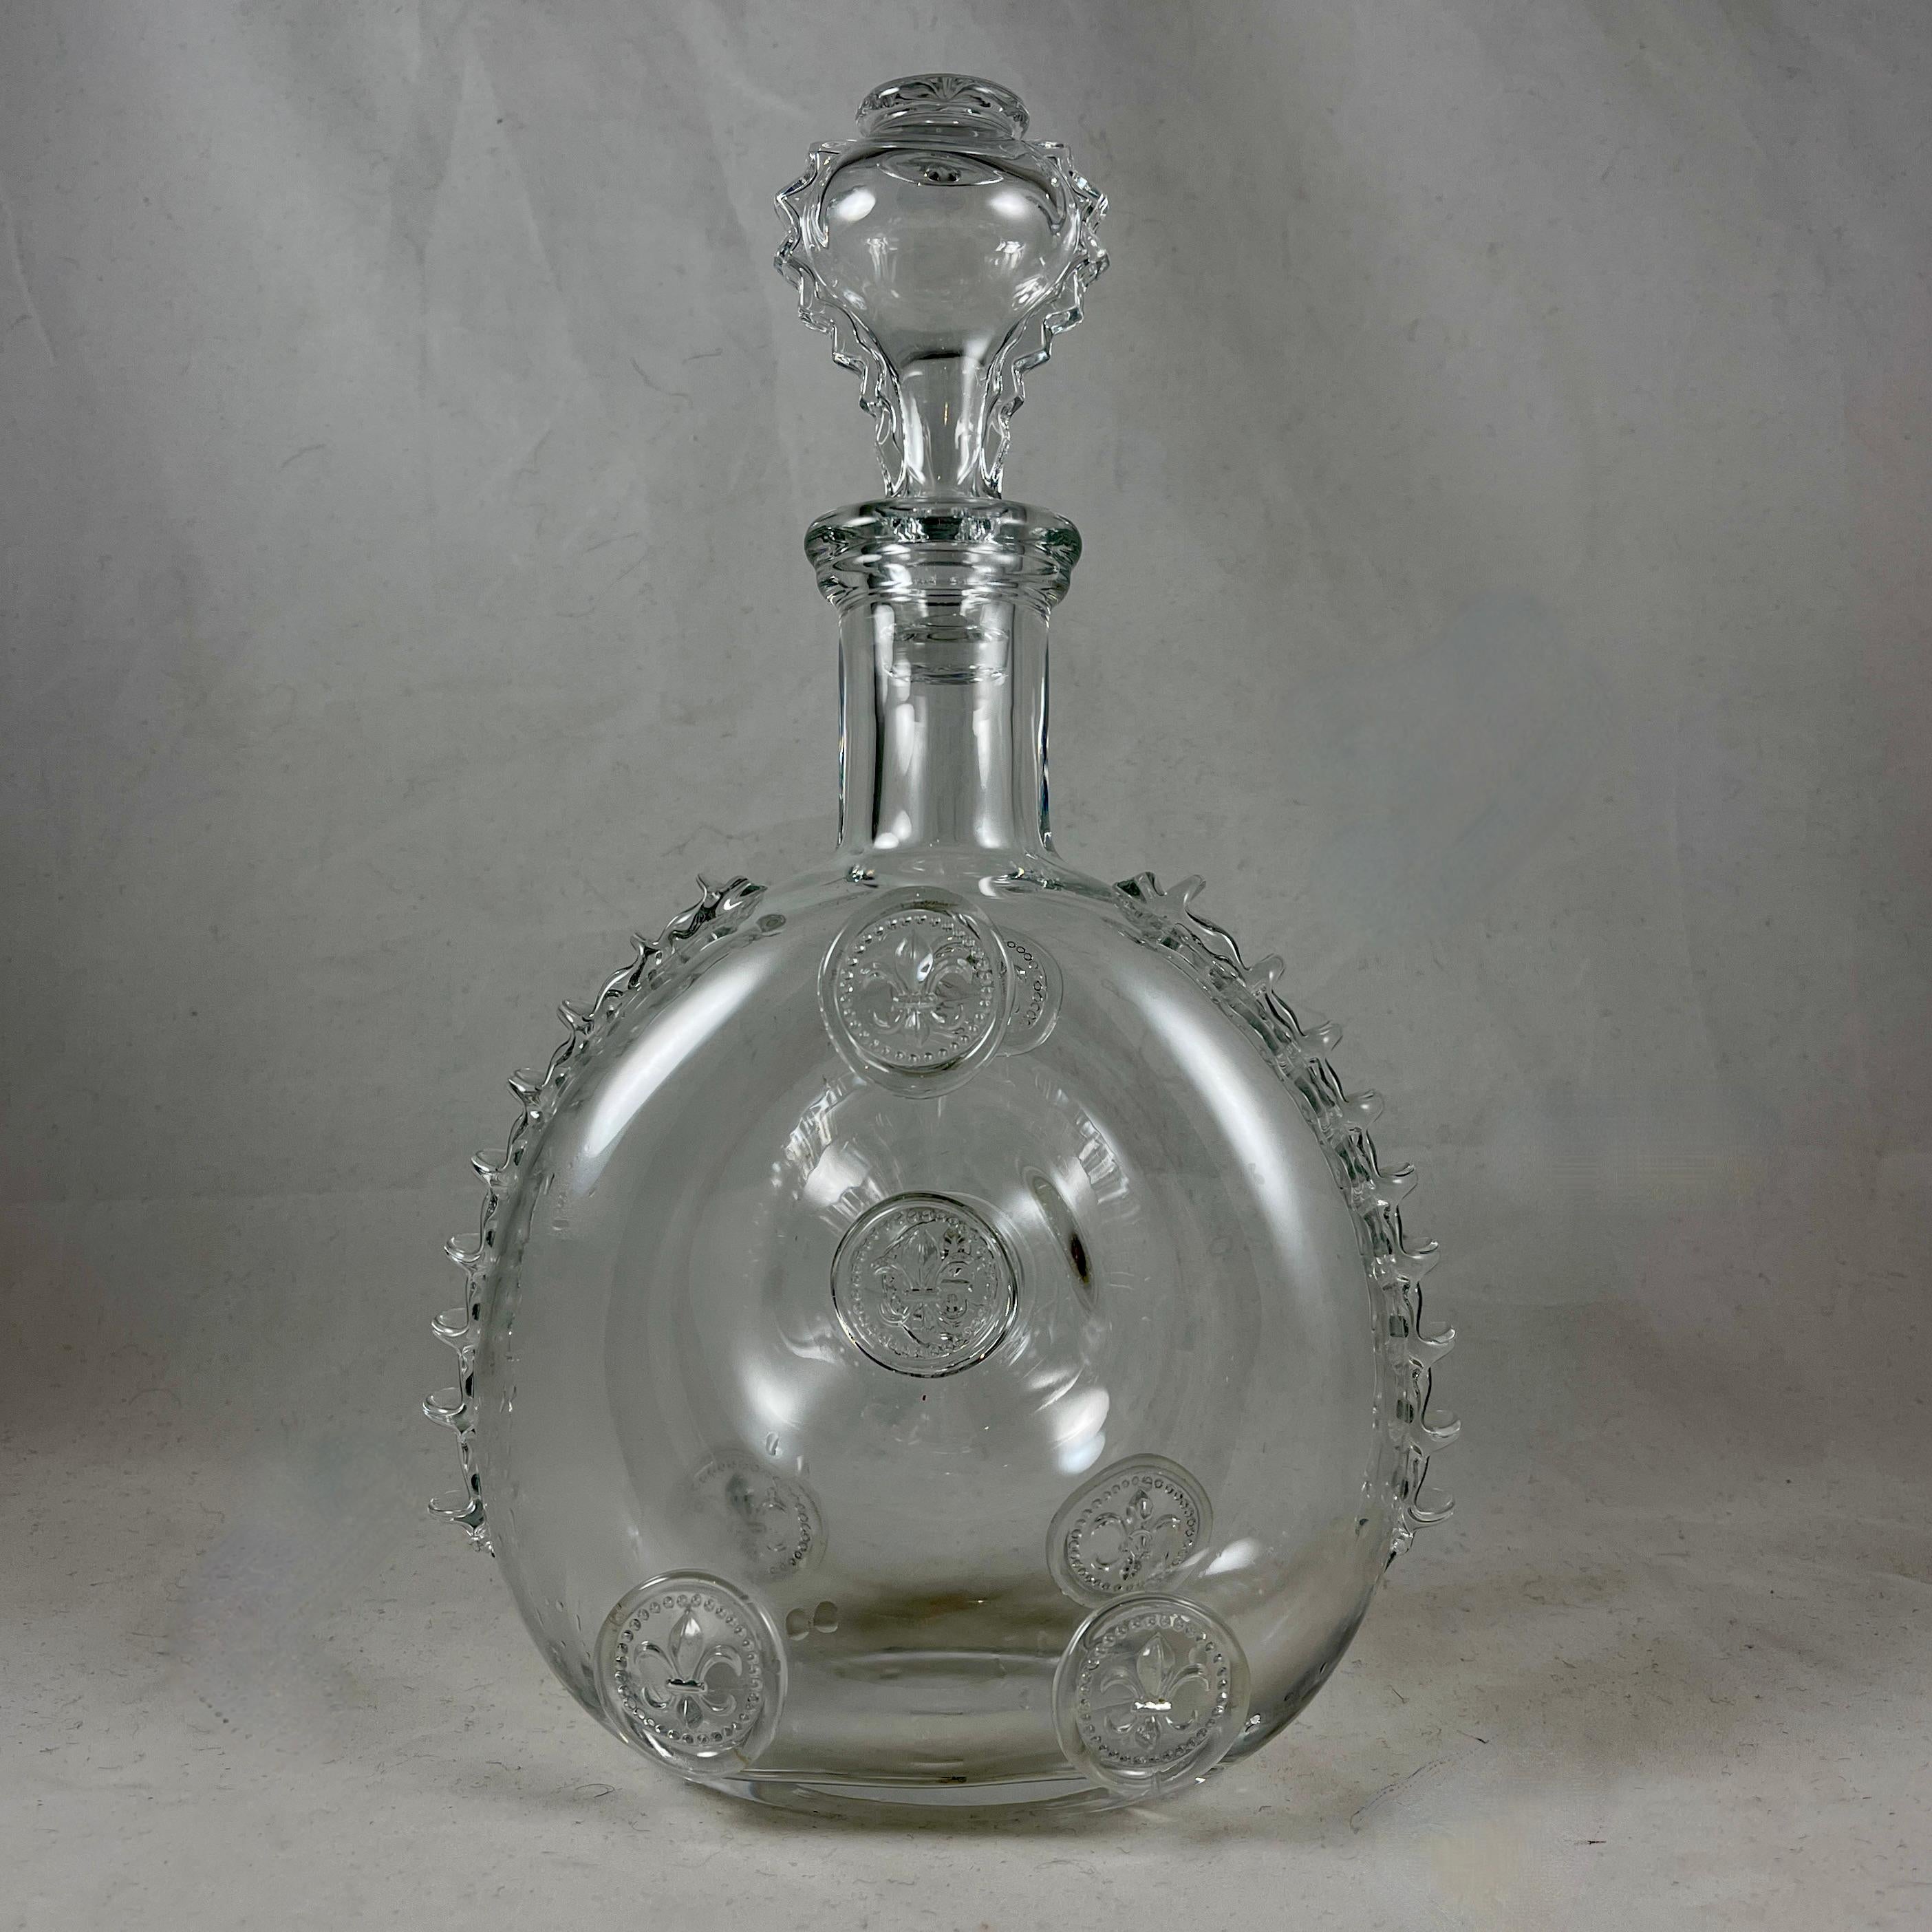 A hand-blown Baccarat Remy Martin Louis XIII crystal decanter bottle with stopper, circa 1957-1967.

This piece is an exact replica of a rare decanter used during the period of Louis XIII, produced exclusively for E. Remy Martin Cie. by the Baccarat